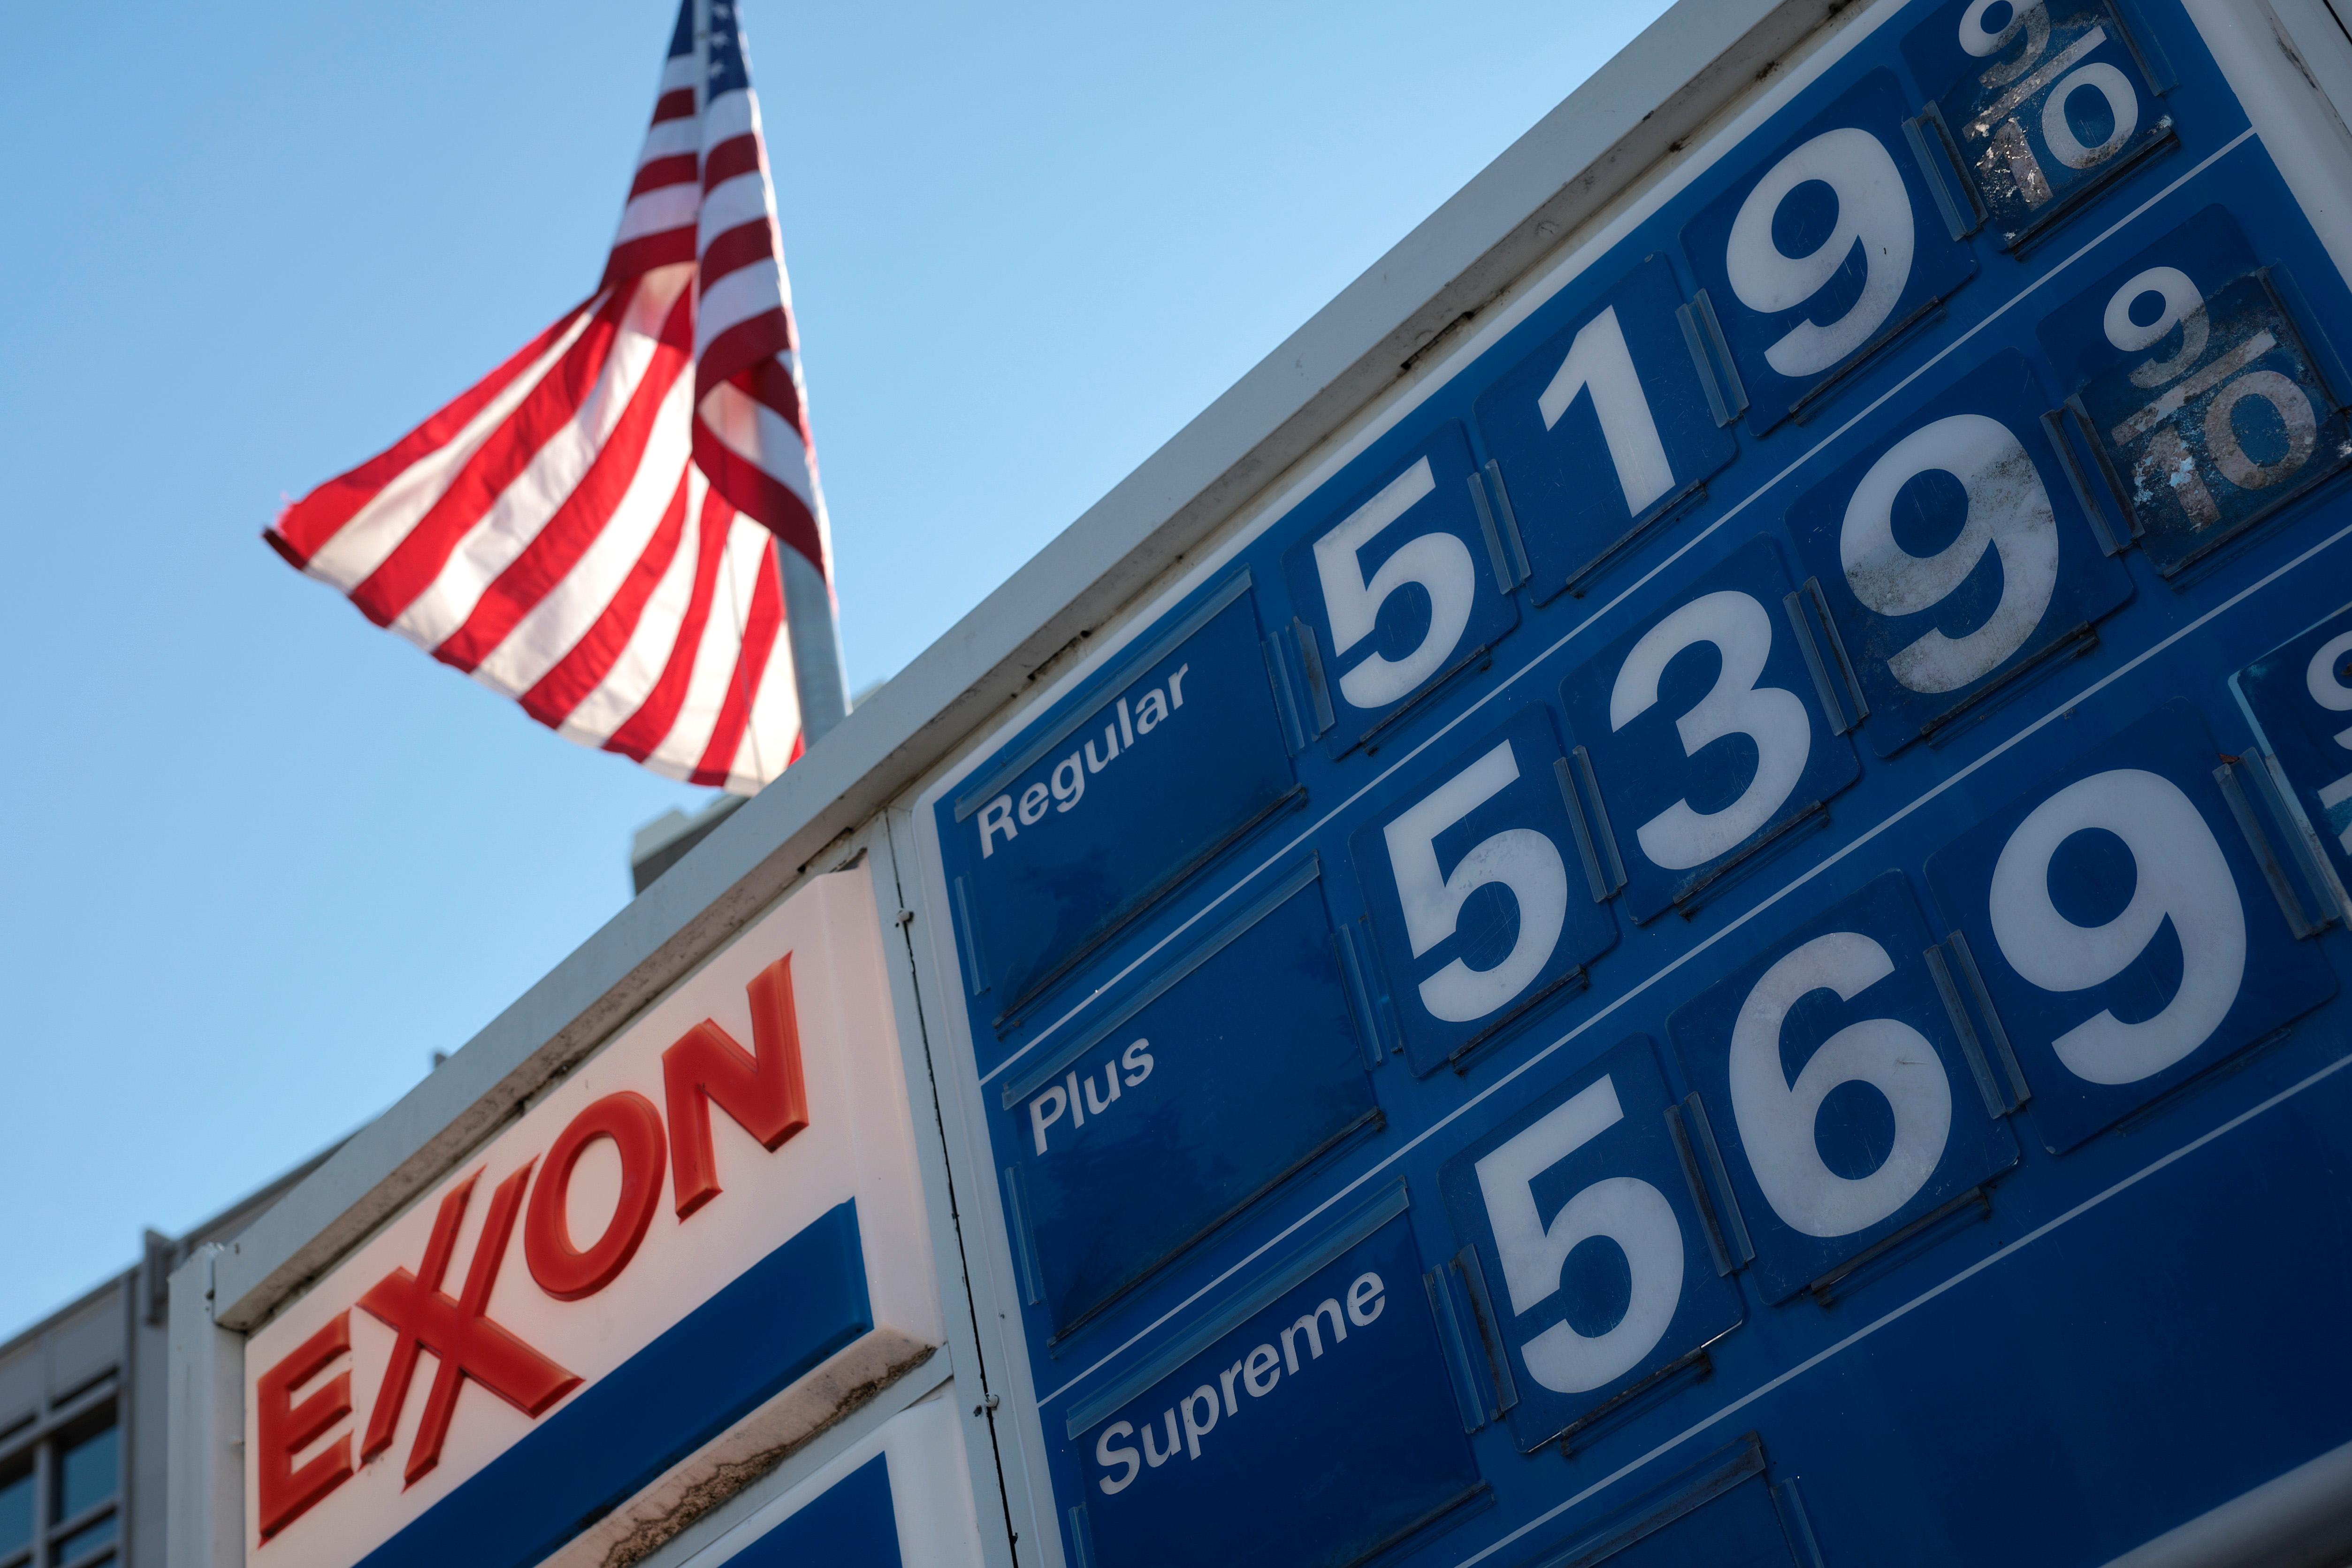 Gas prices dispalyed at an Exxon gas station